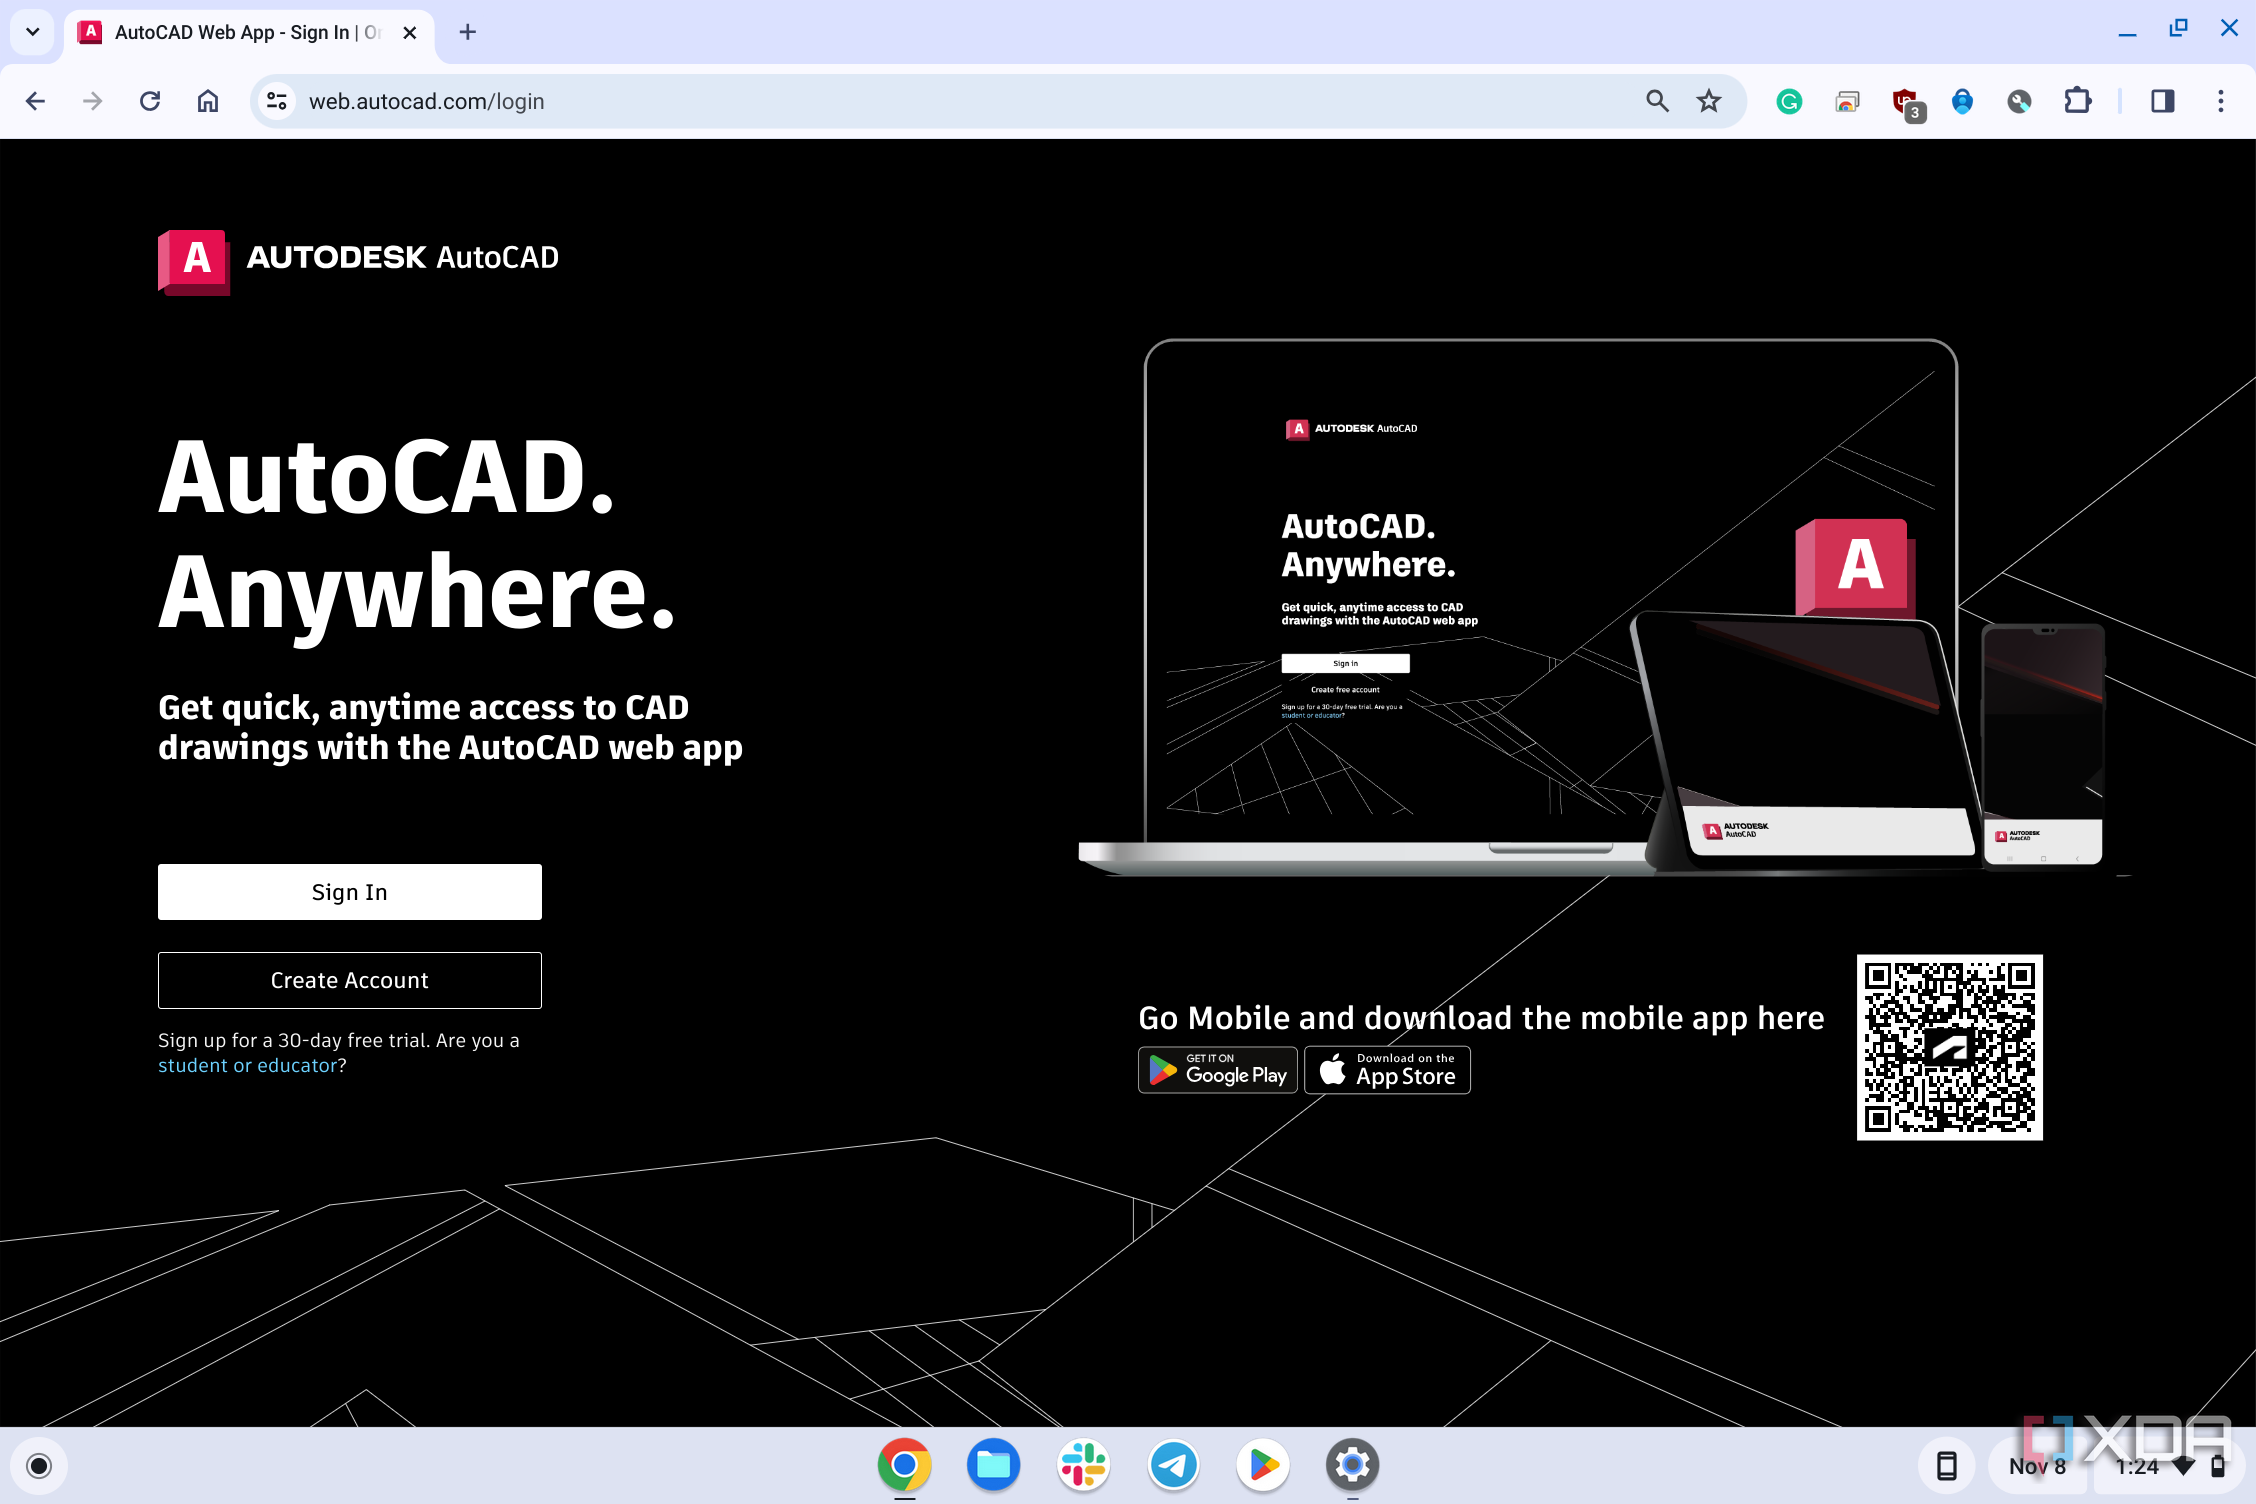 AutoCAD running in the Chrome browser